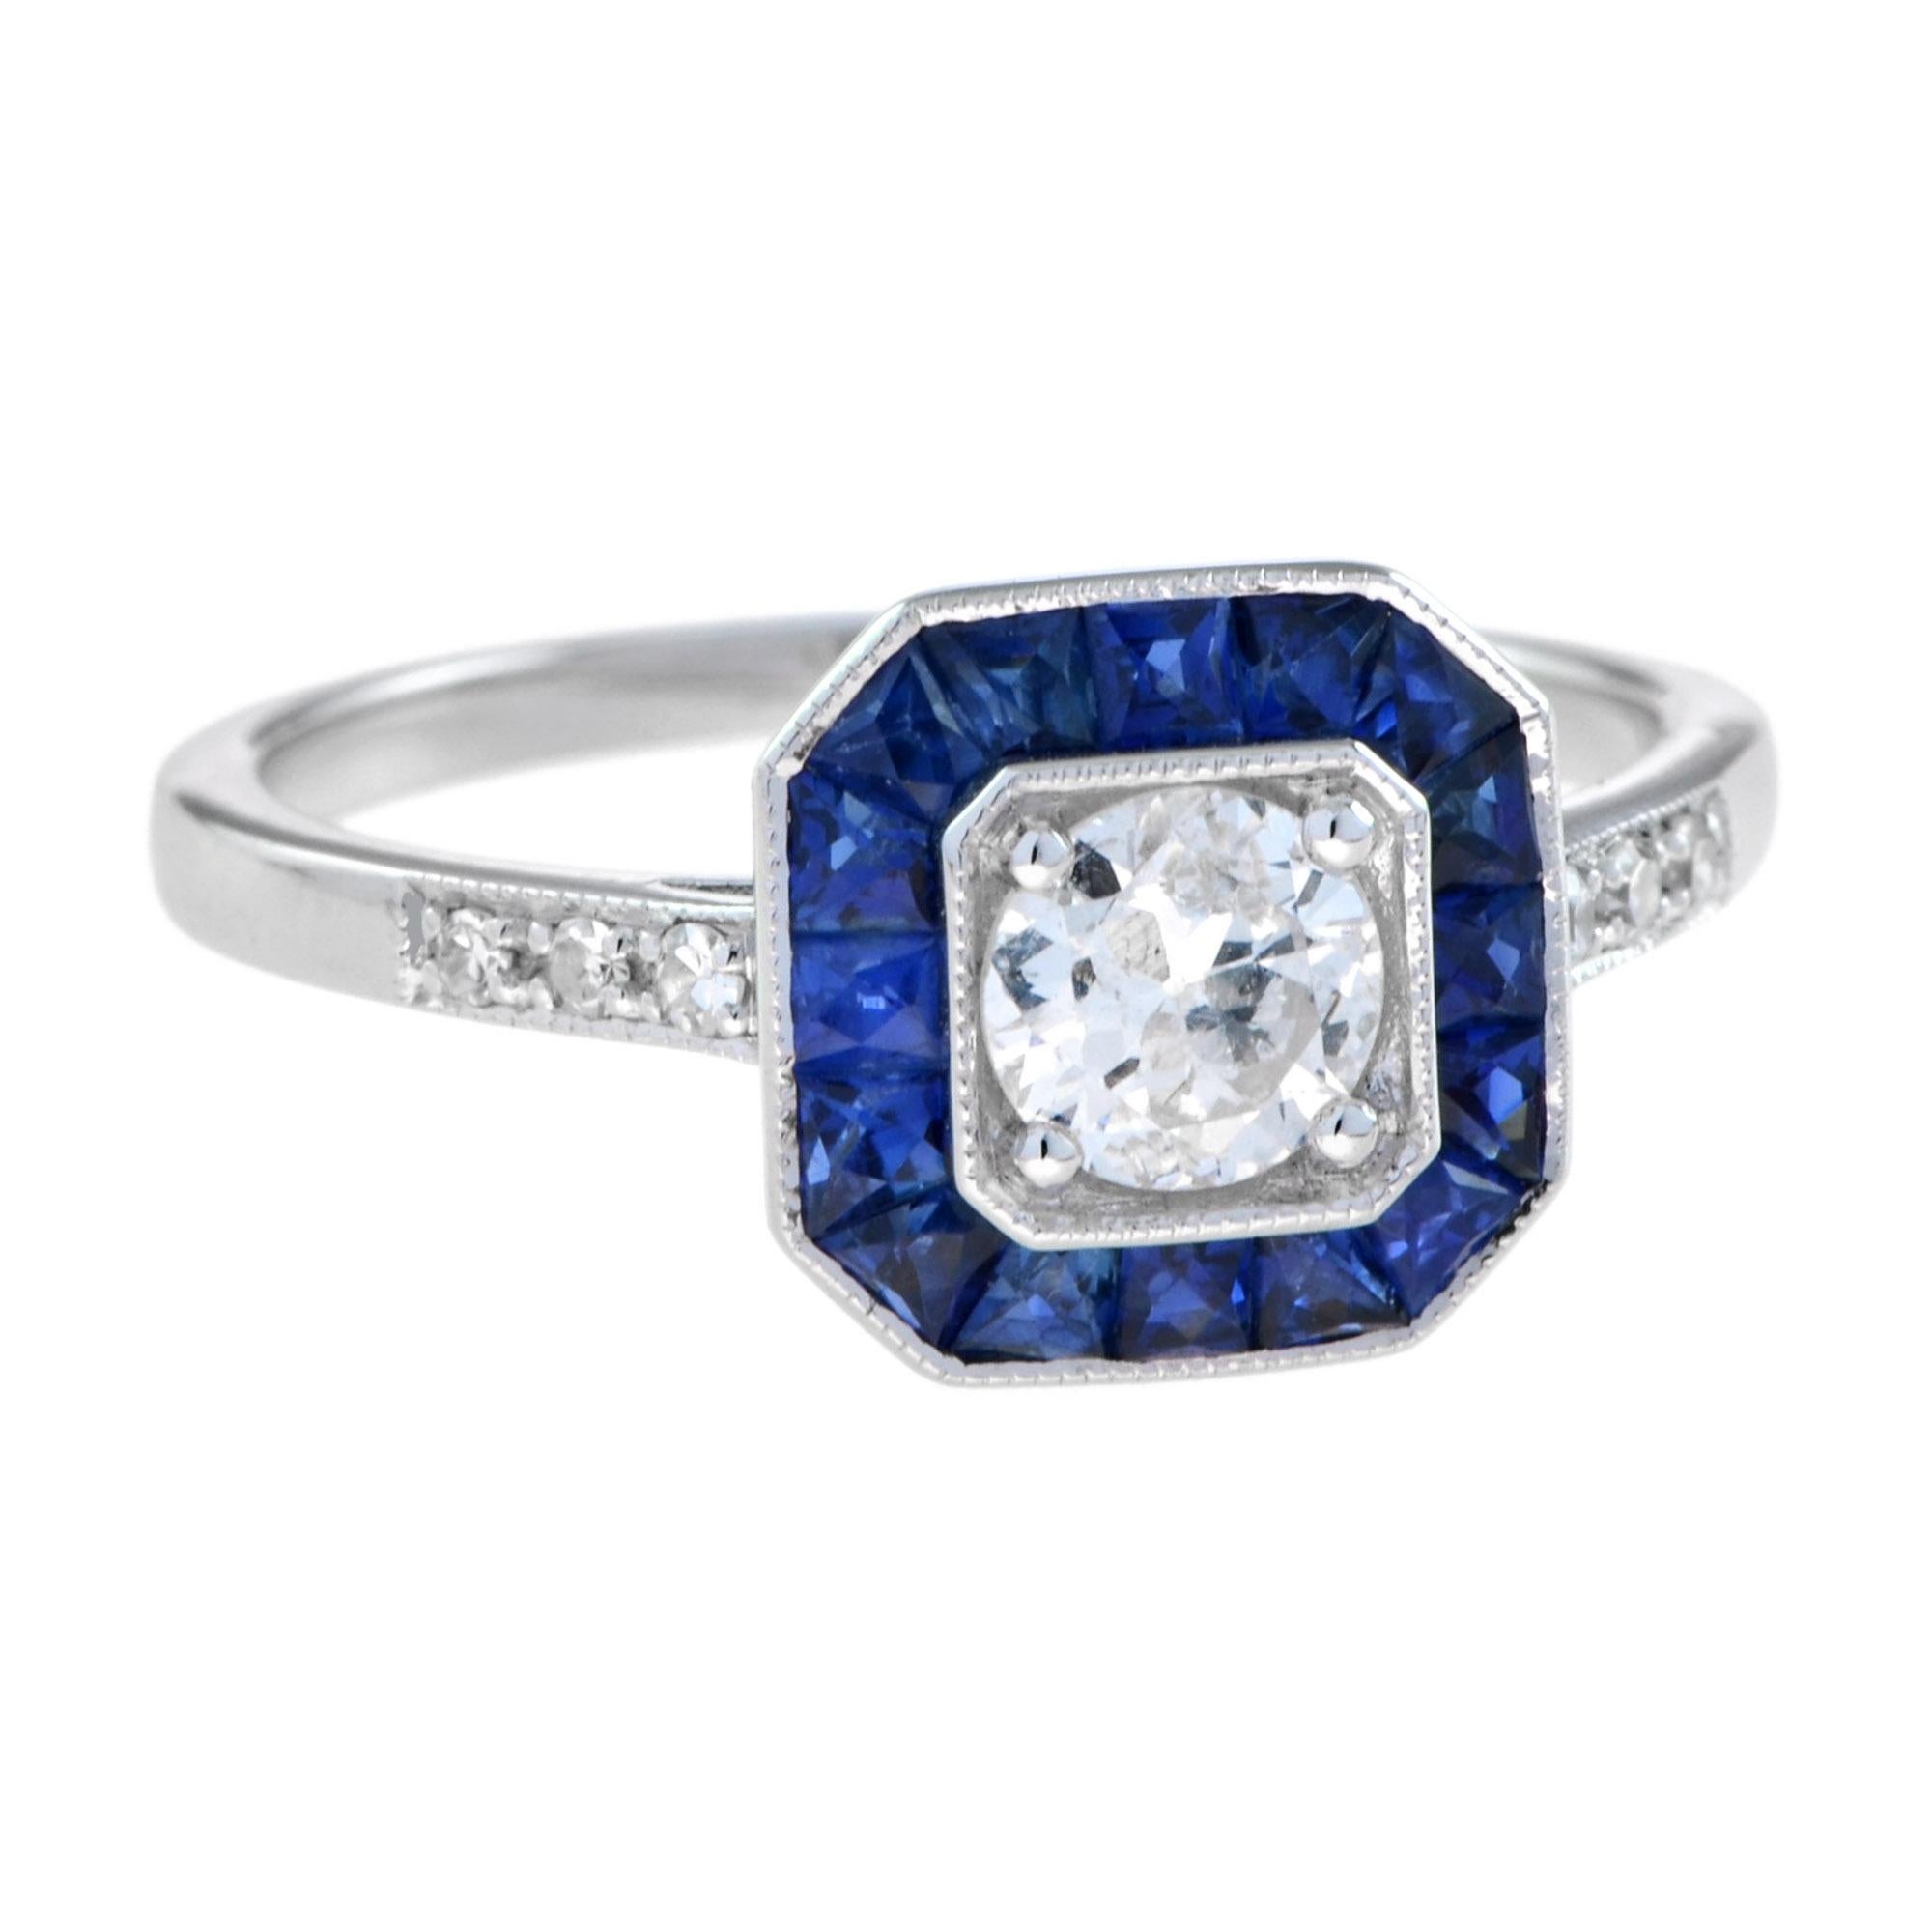 A stunning diamond and sapphire ring, centered with a beautiful round brilliant diamond setting surrounded by a fine geometric frame of French cut sapphires and with diamond set shoulders, all in a finely hand-crafted 18K white gold mount with plain